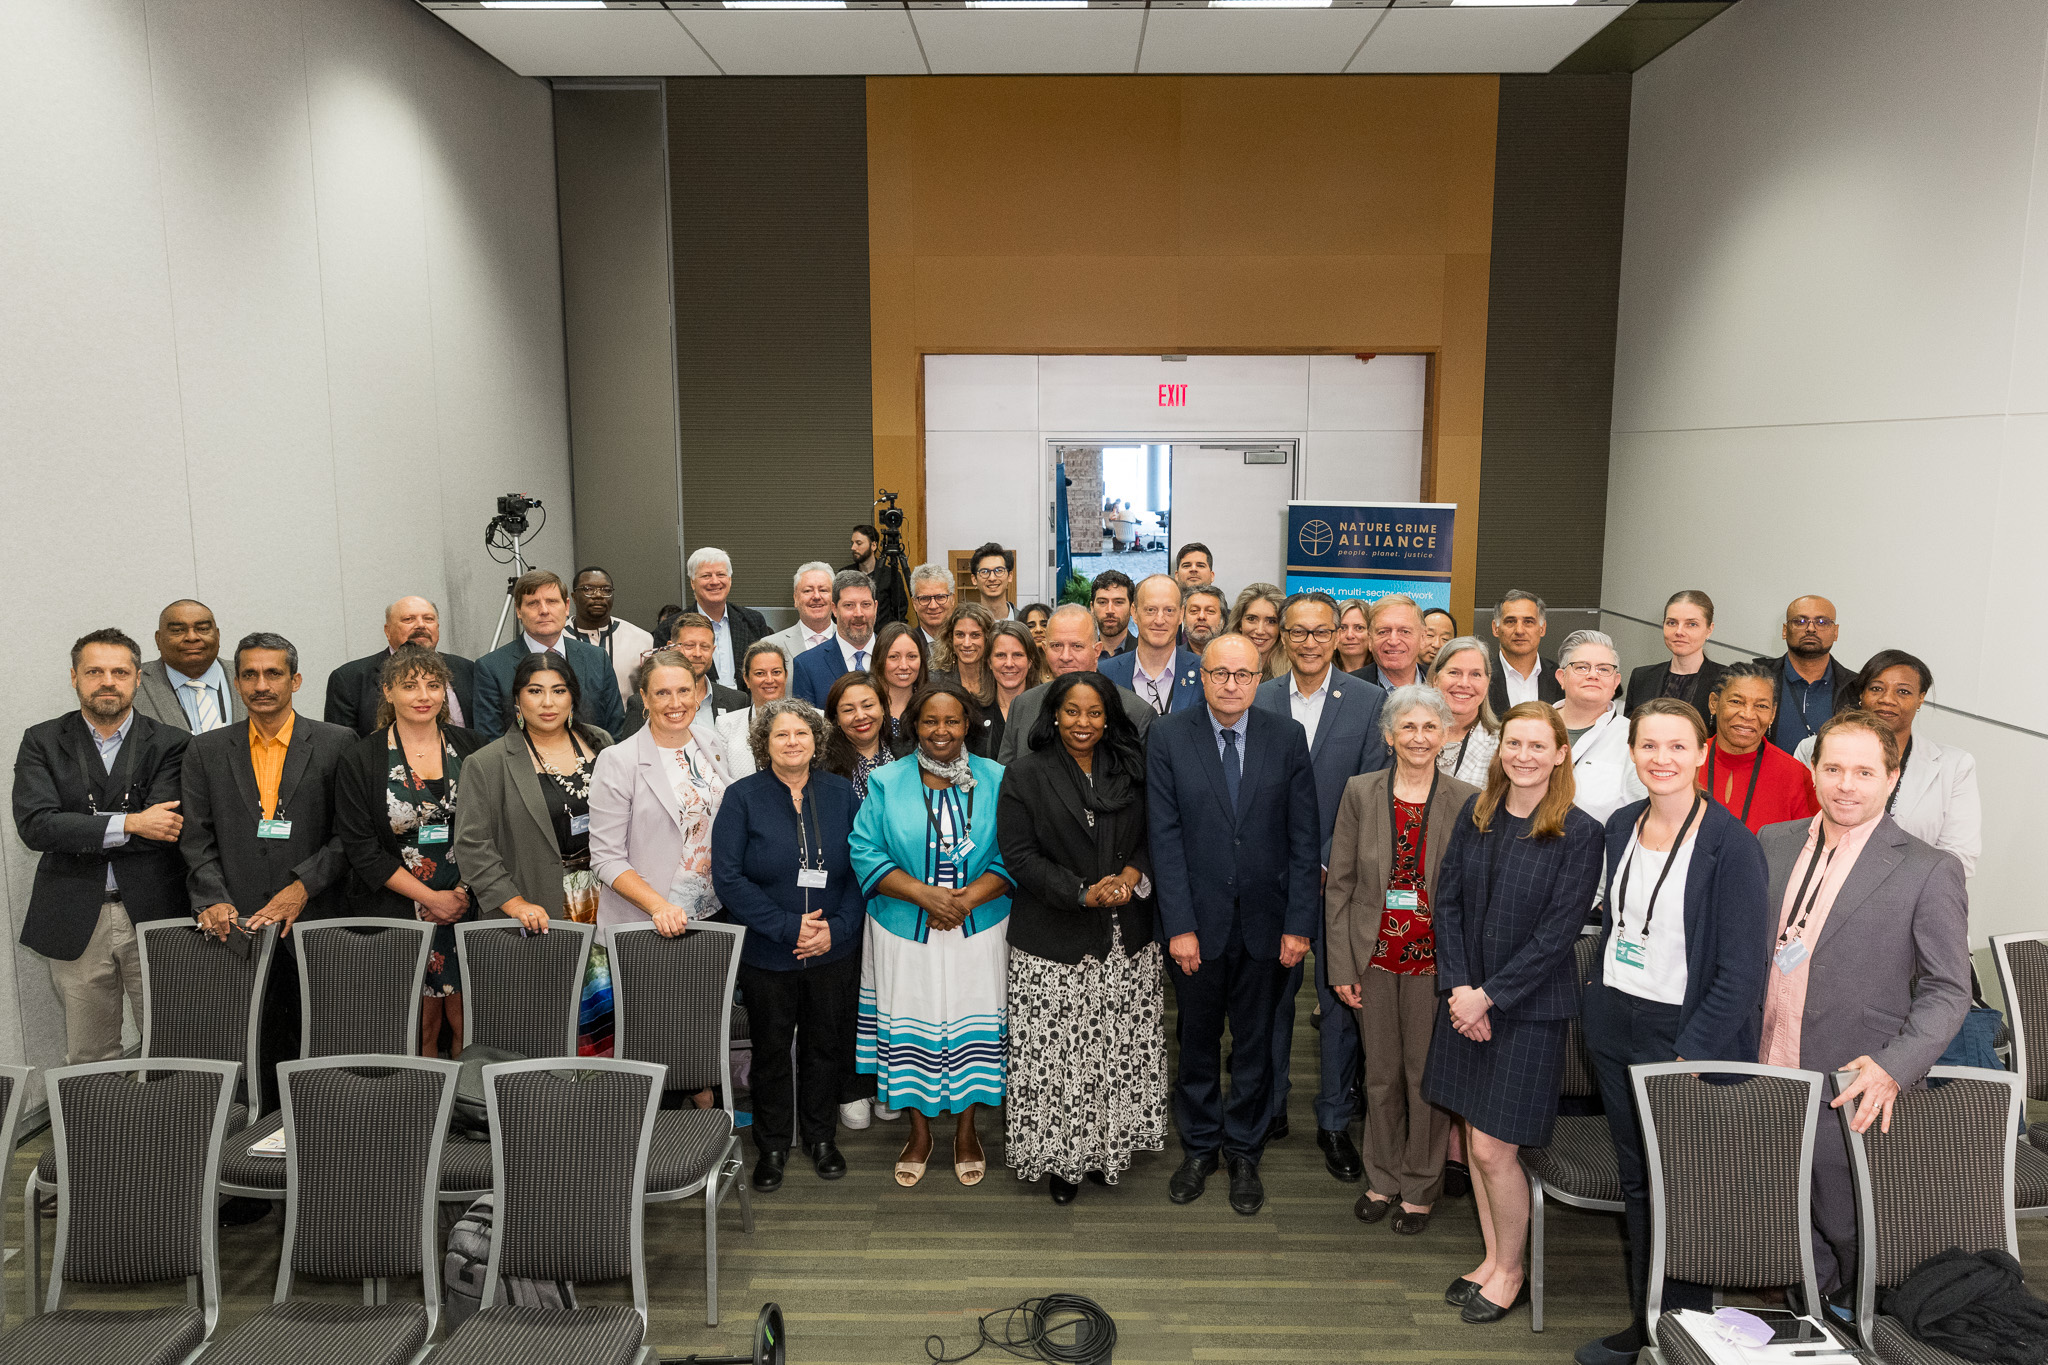 The Nature Crime Alliance launch in Vancouver, Canada, 23 August. The initiative so far has 22 members, led by the governments of Norway, the United States and Gabon, and including the UN Office on Drugs and Crime and Interpol. (Image: World Resources Institute)